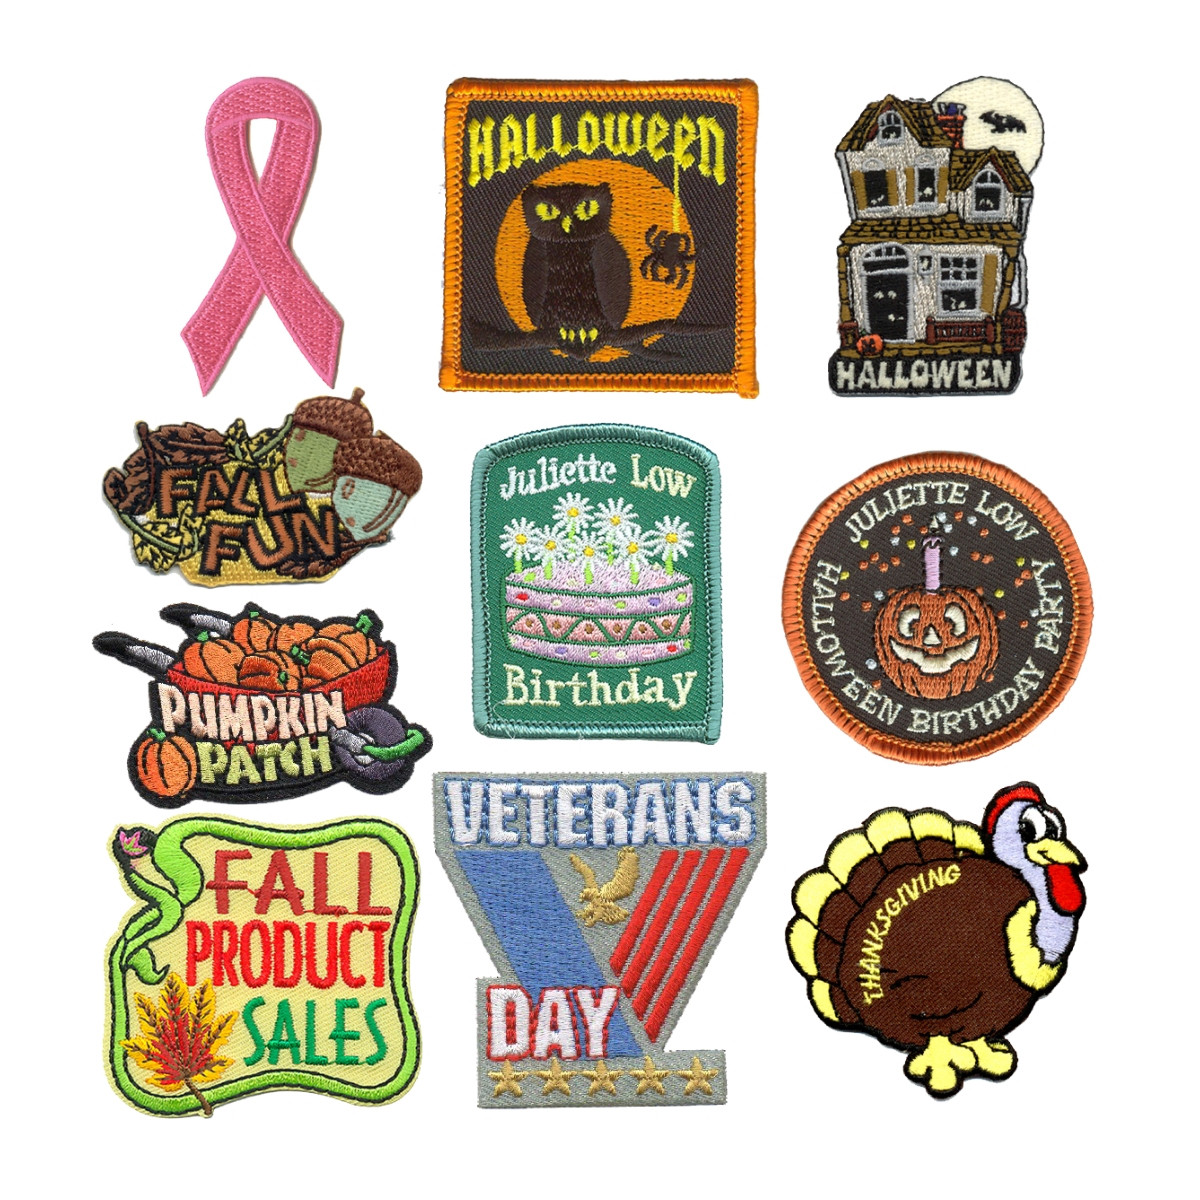 Fall Fun Patches